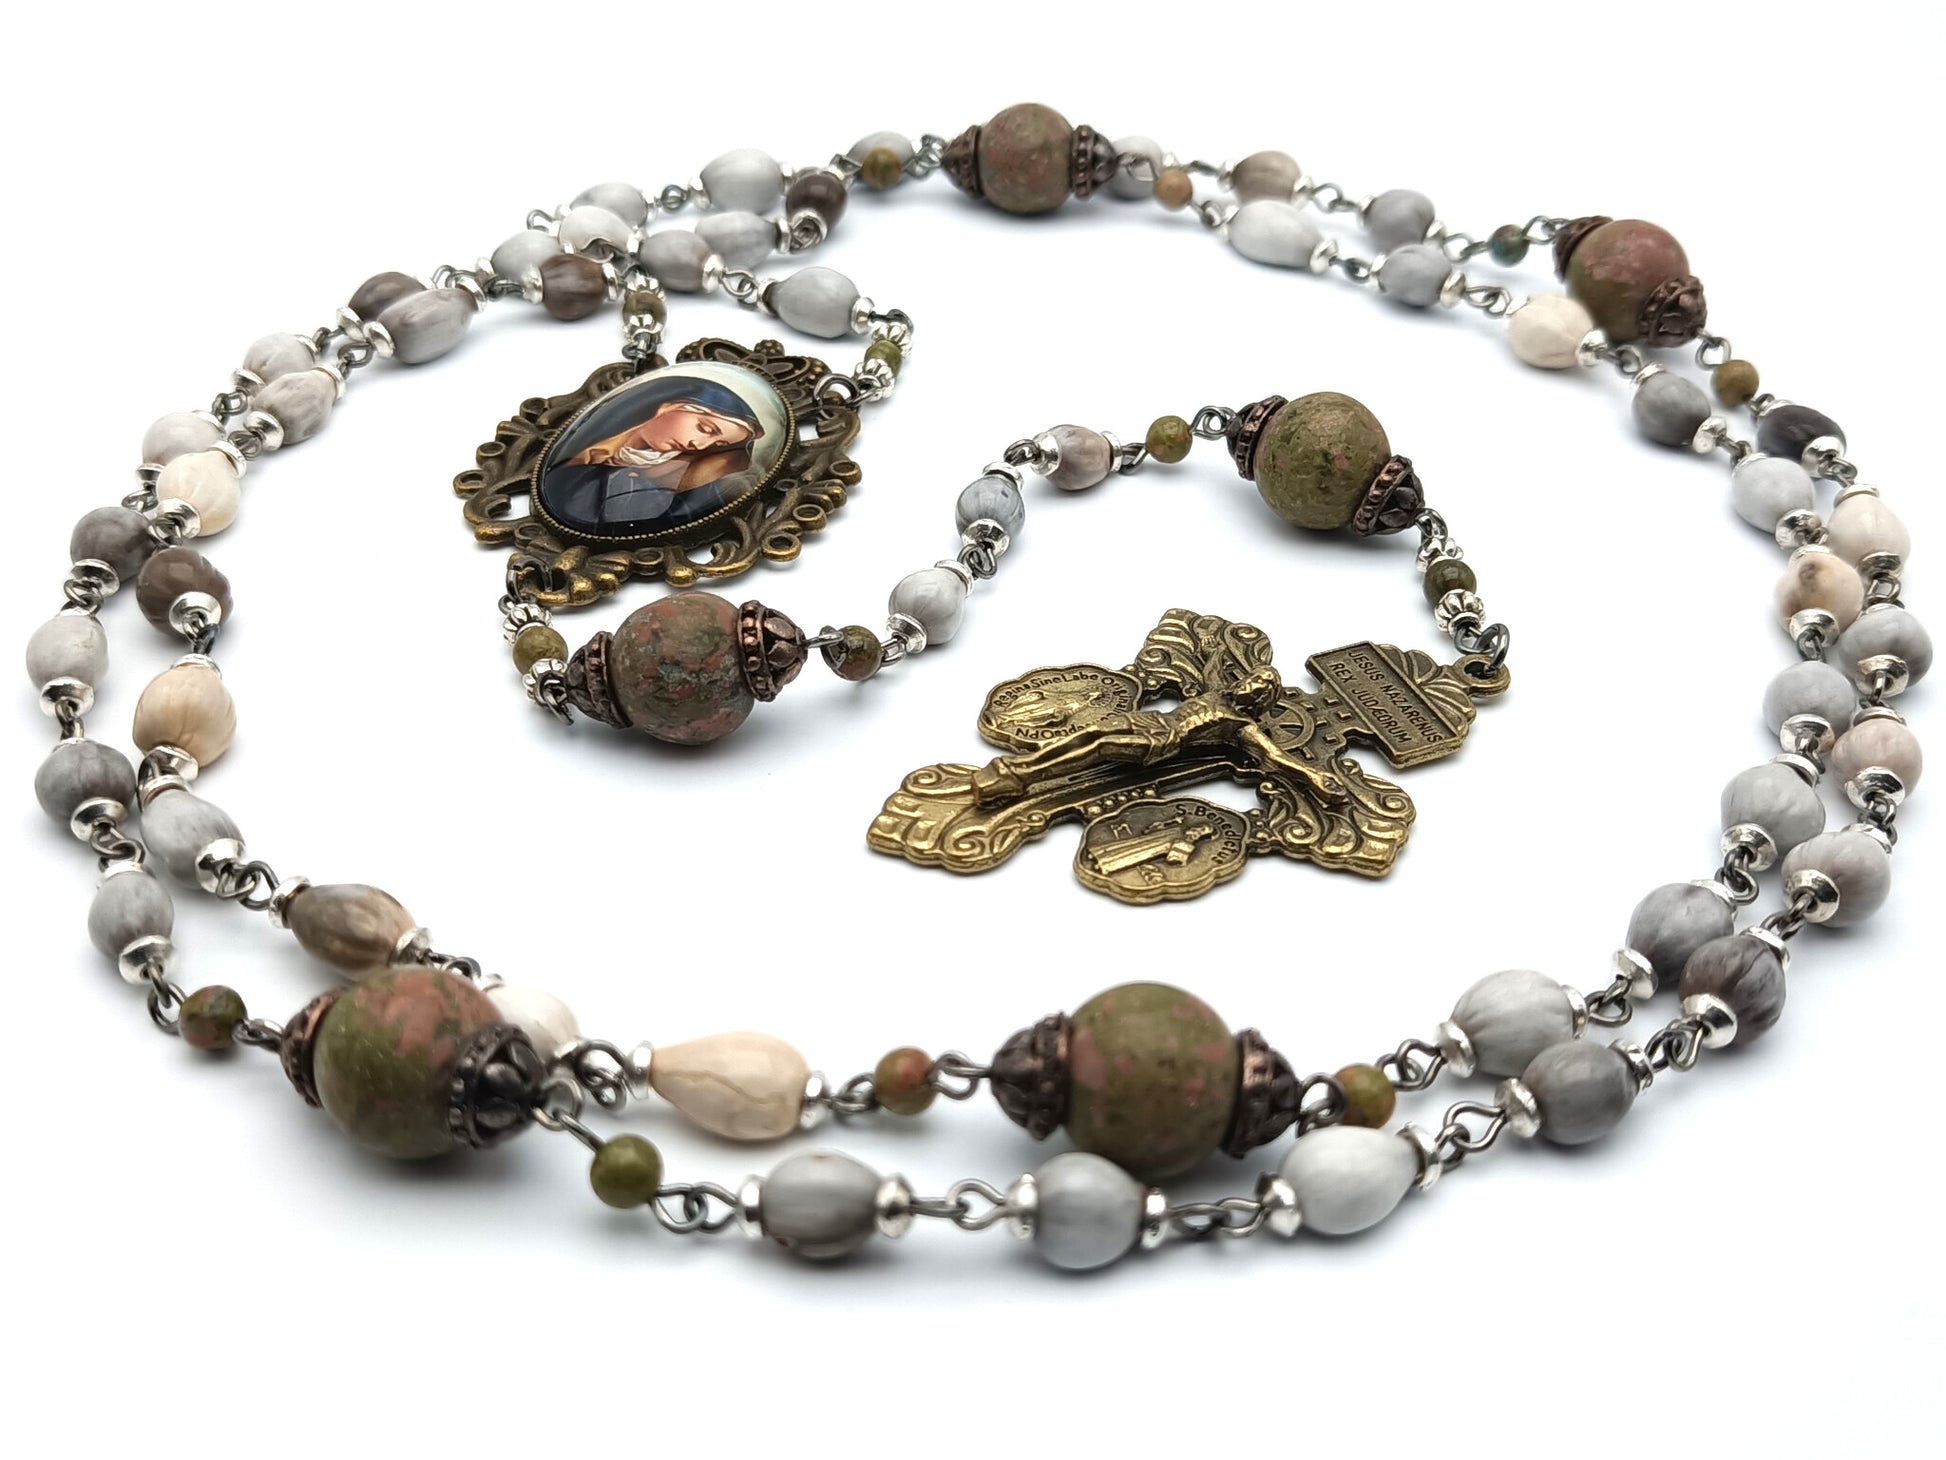 Our Lady of Sorrows unique rosary beads with Jobs tears beads, jasper gemstone pater beads, bronze pardon crucifix and picture centre medal.